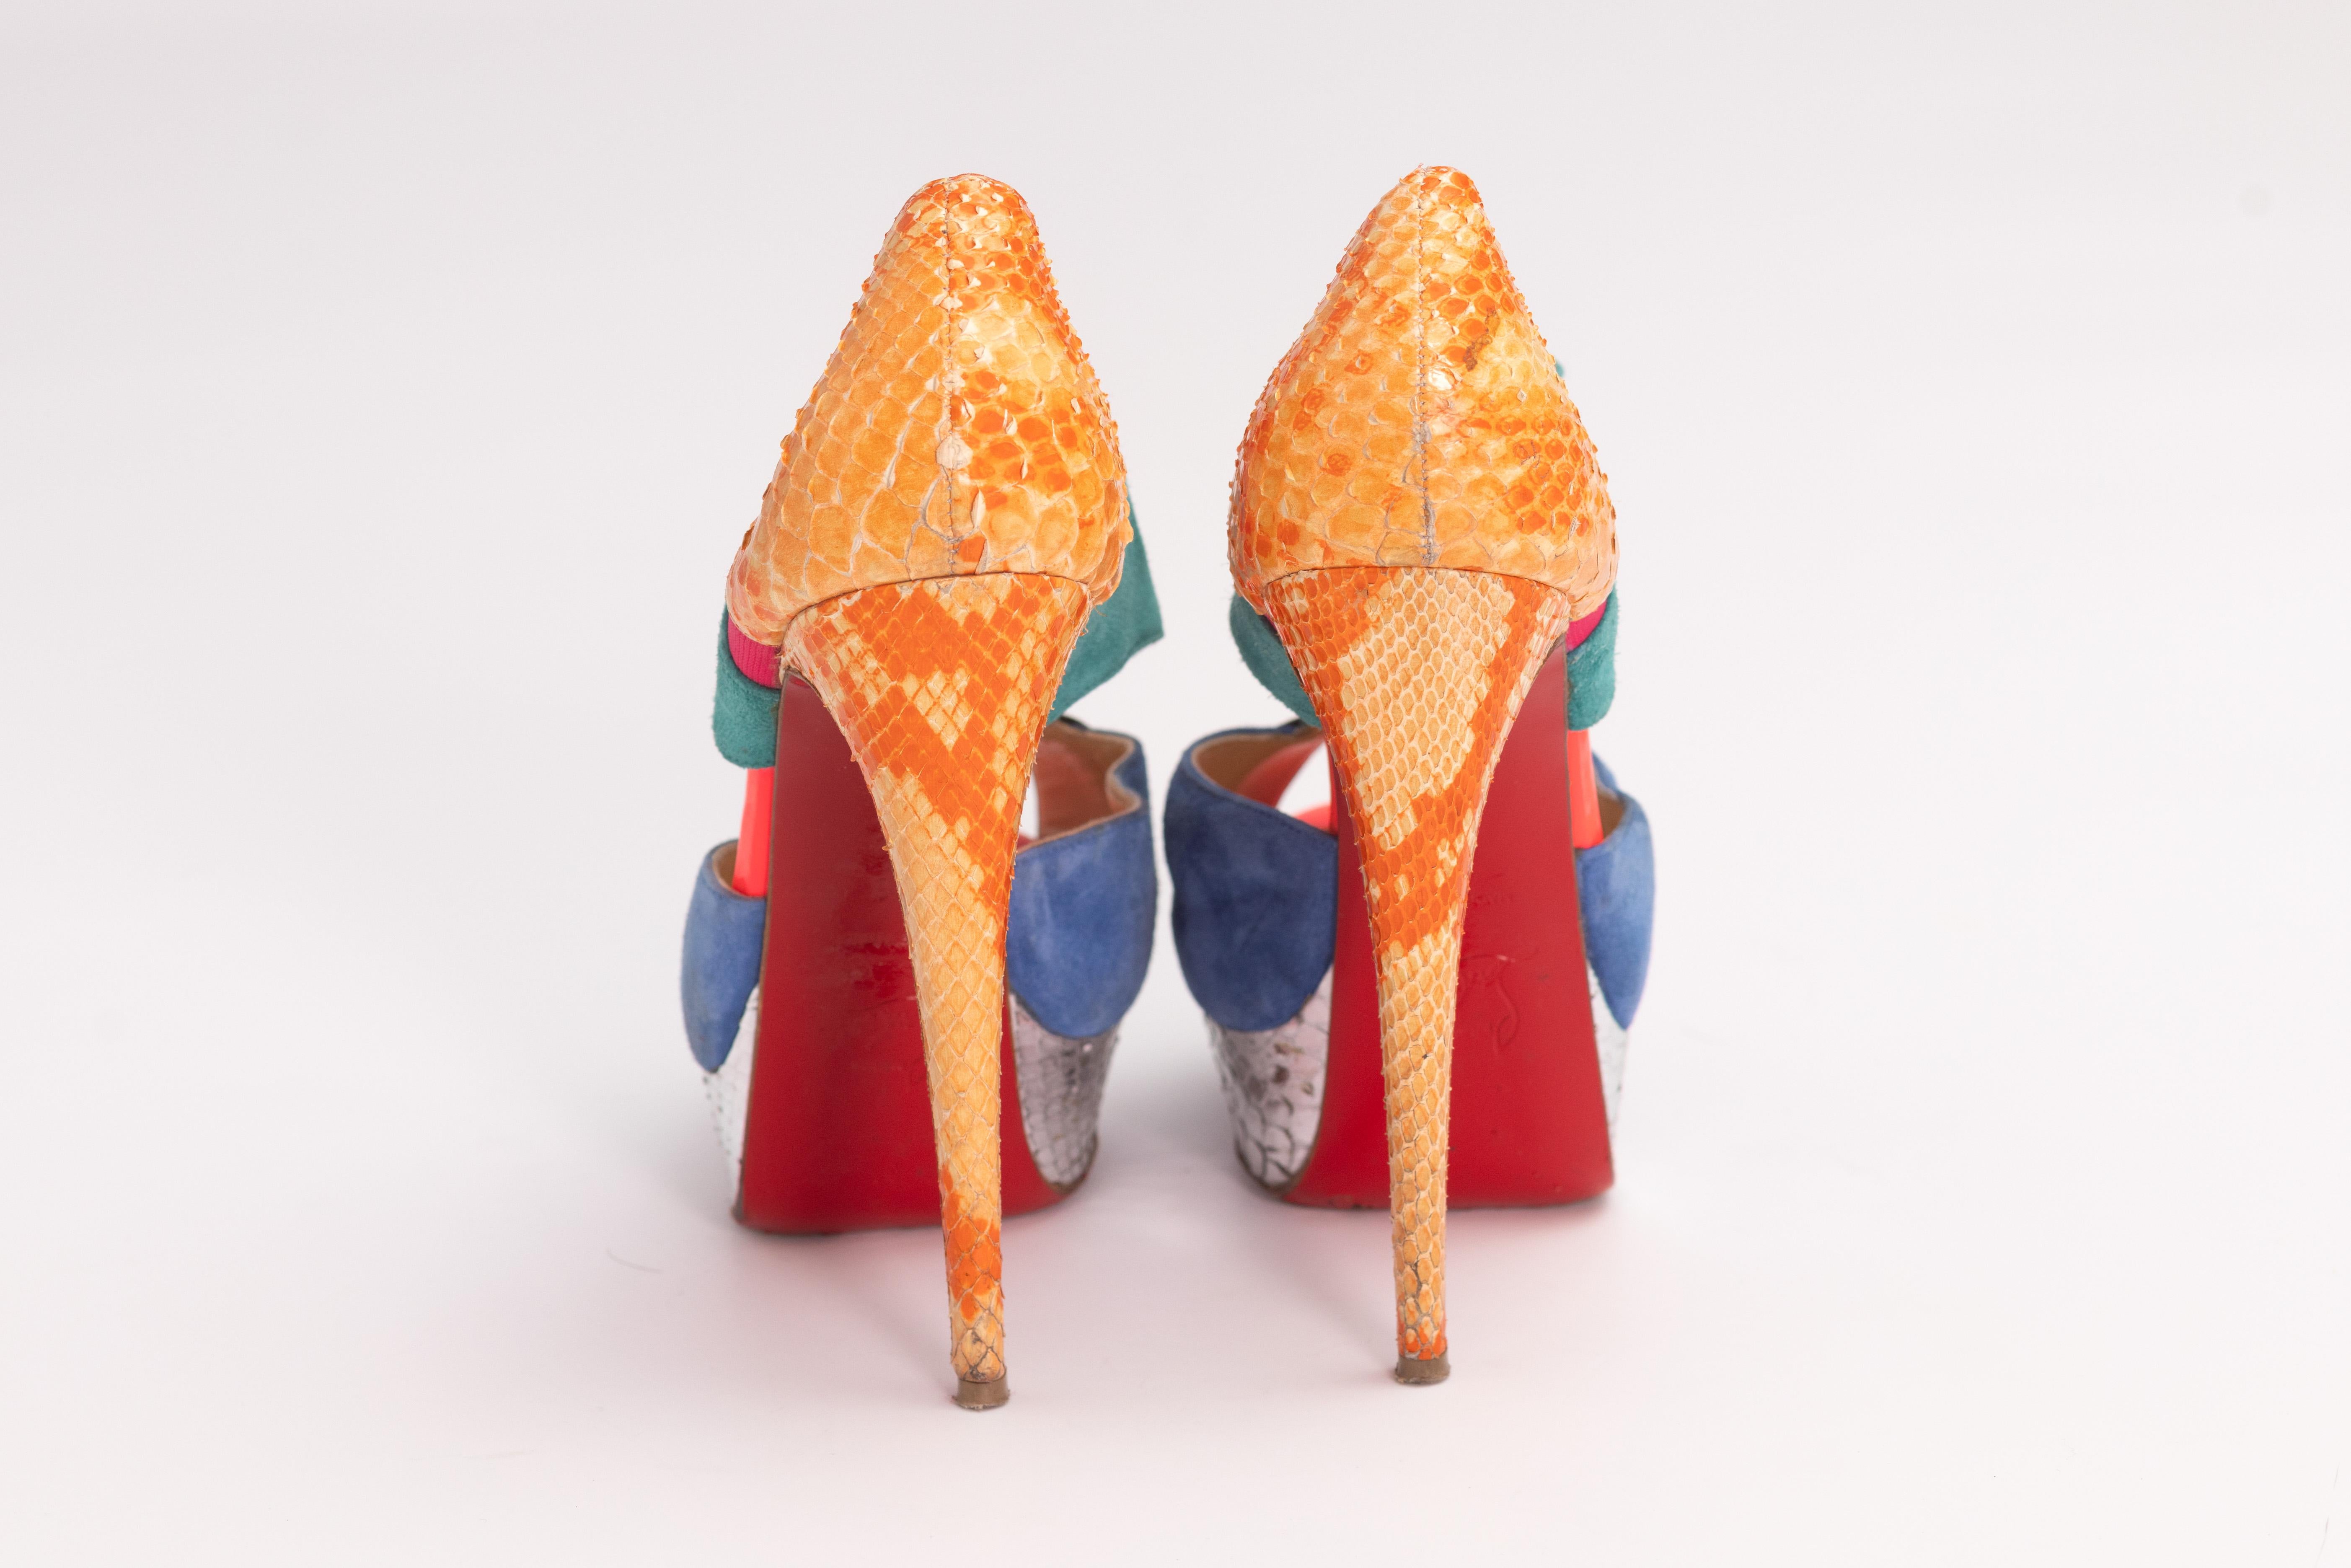 Christian Louboutin Suede & Python Cut Out Platform Heels (EU 36) In Good Condition For Sale In Montreal, Quebec